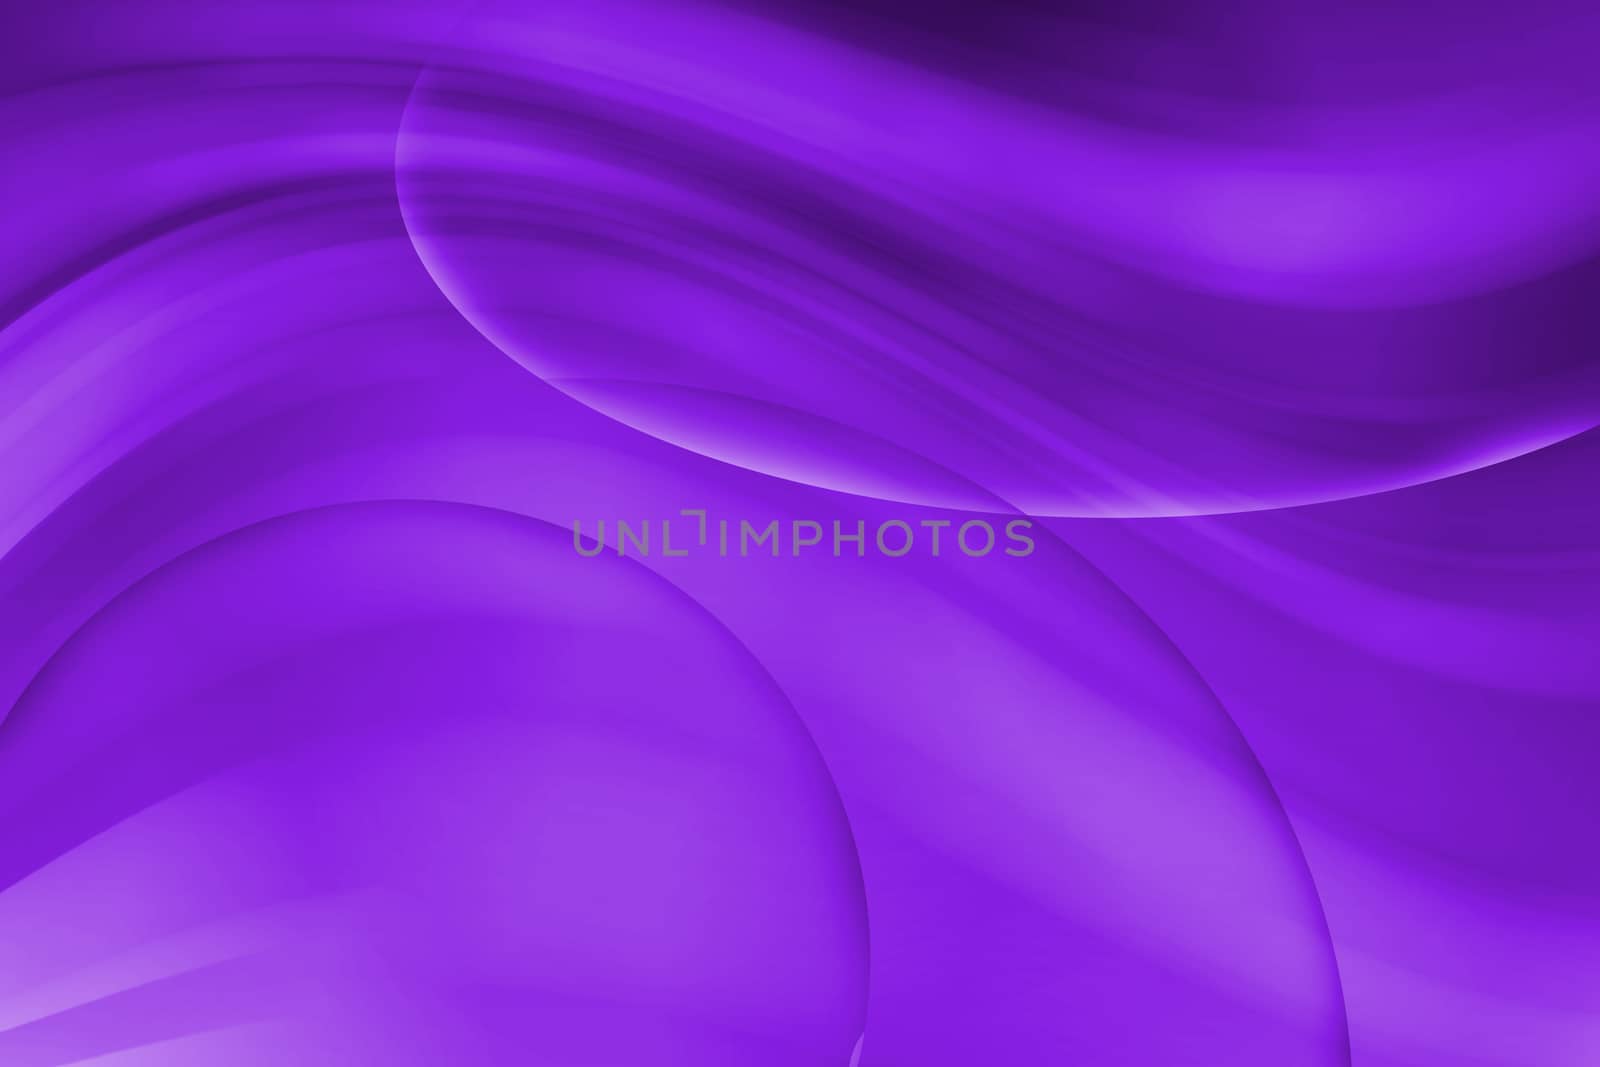 abstract curve and wavy purple background